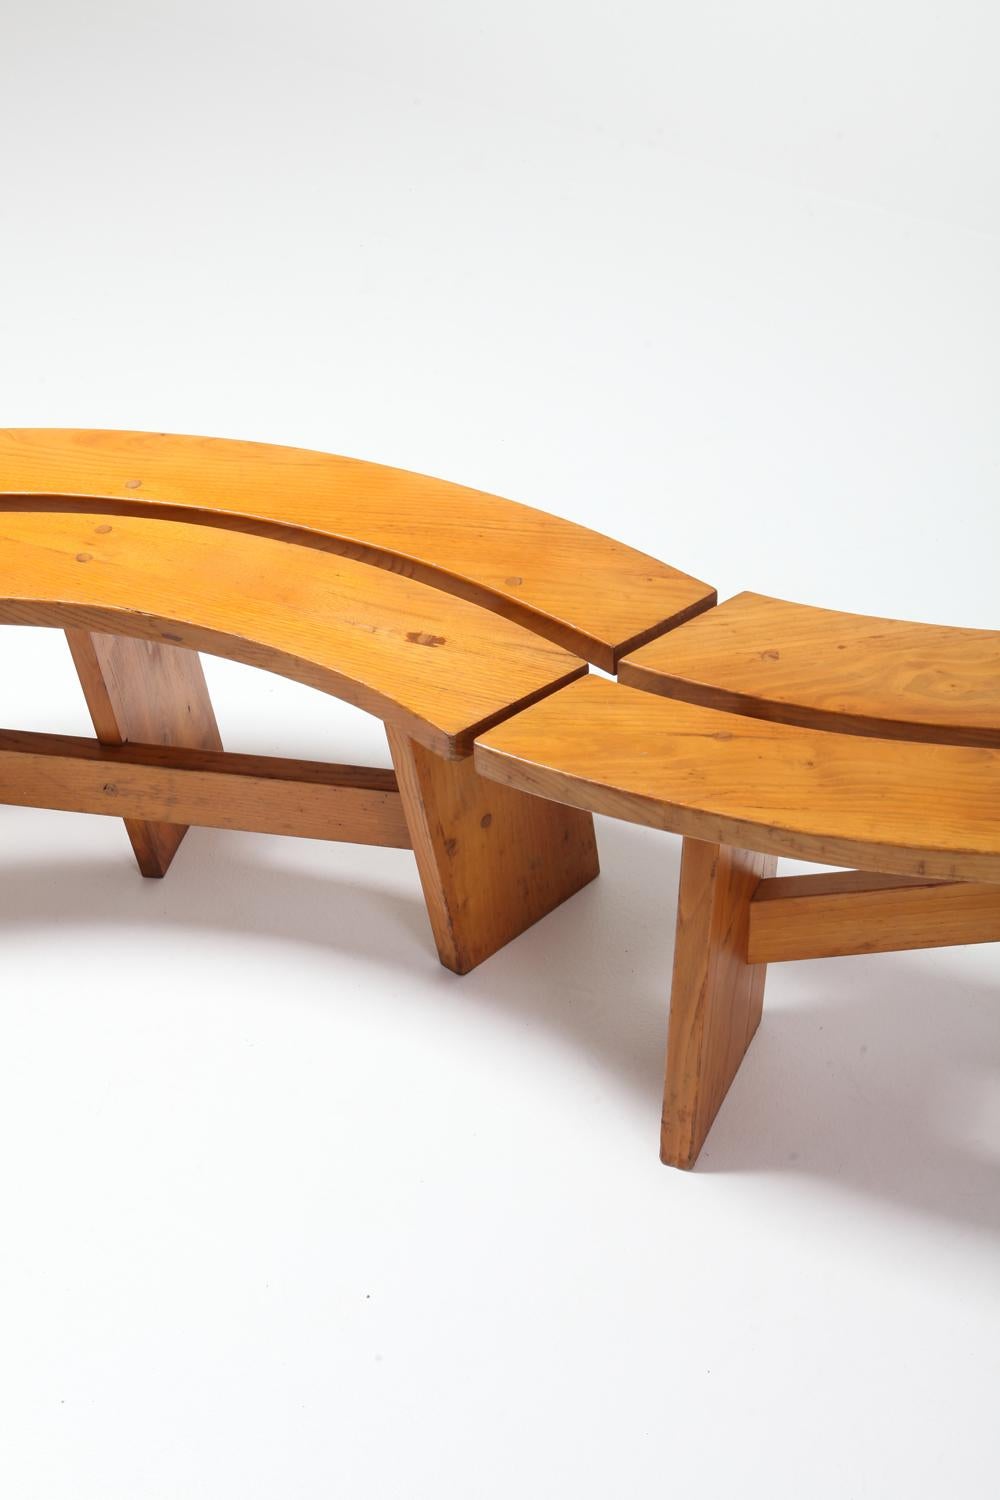 Pierre Chapo Curved Benches in Elmwood 6